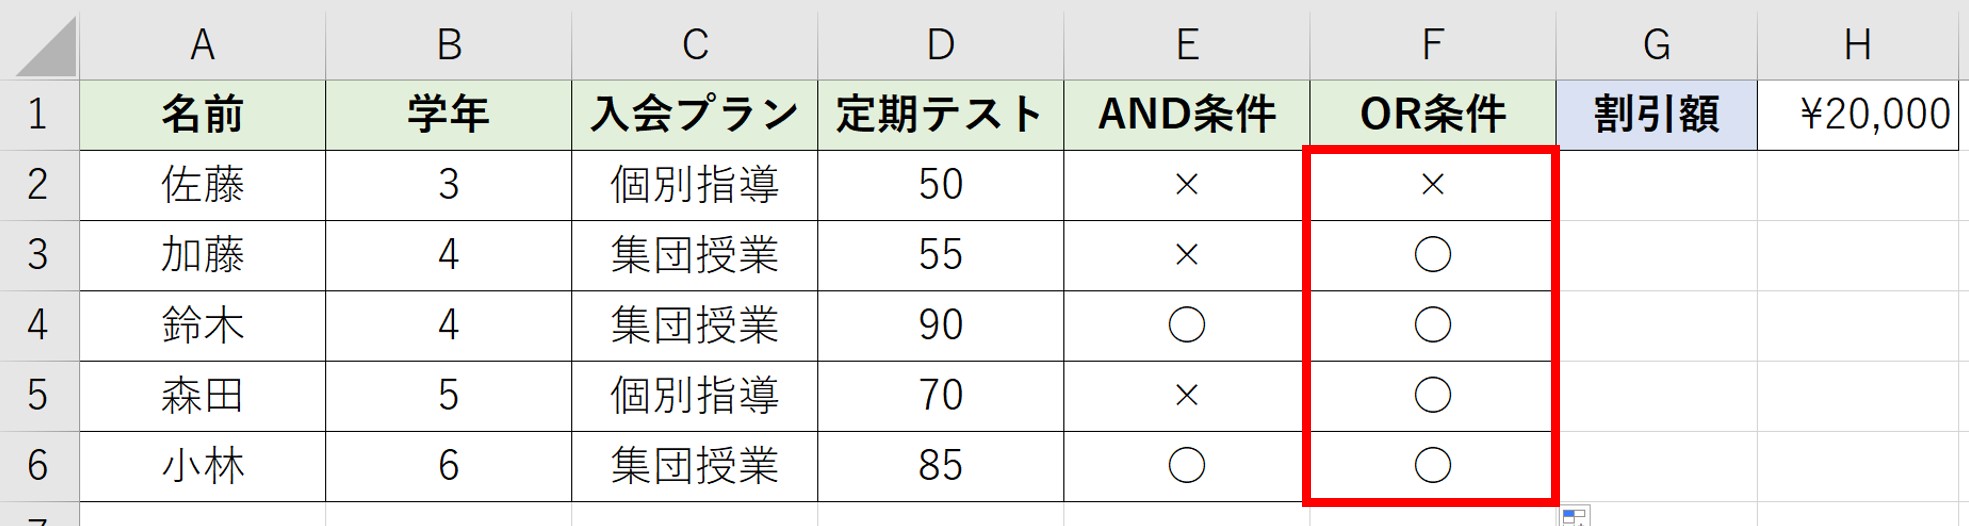 IF関数とOR関数を併用したExcel画像